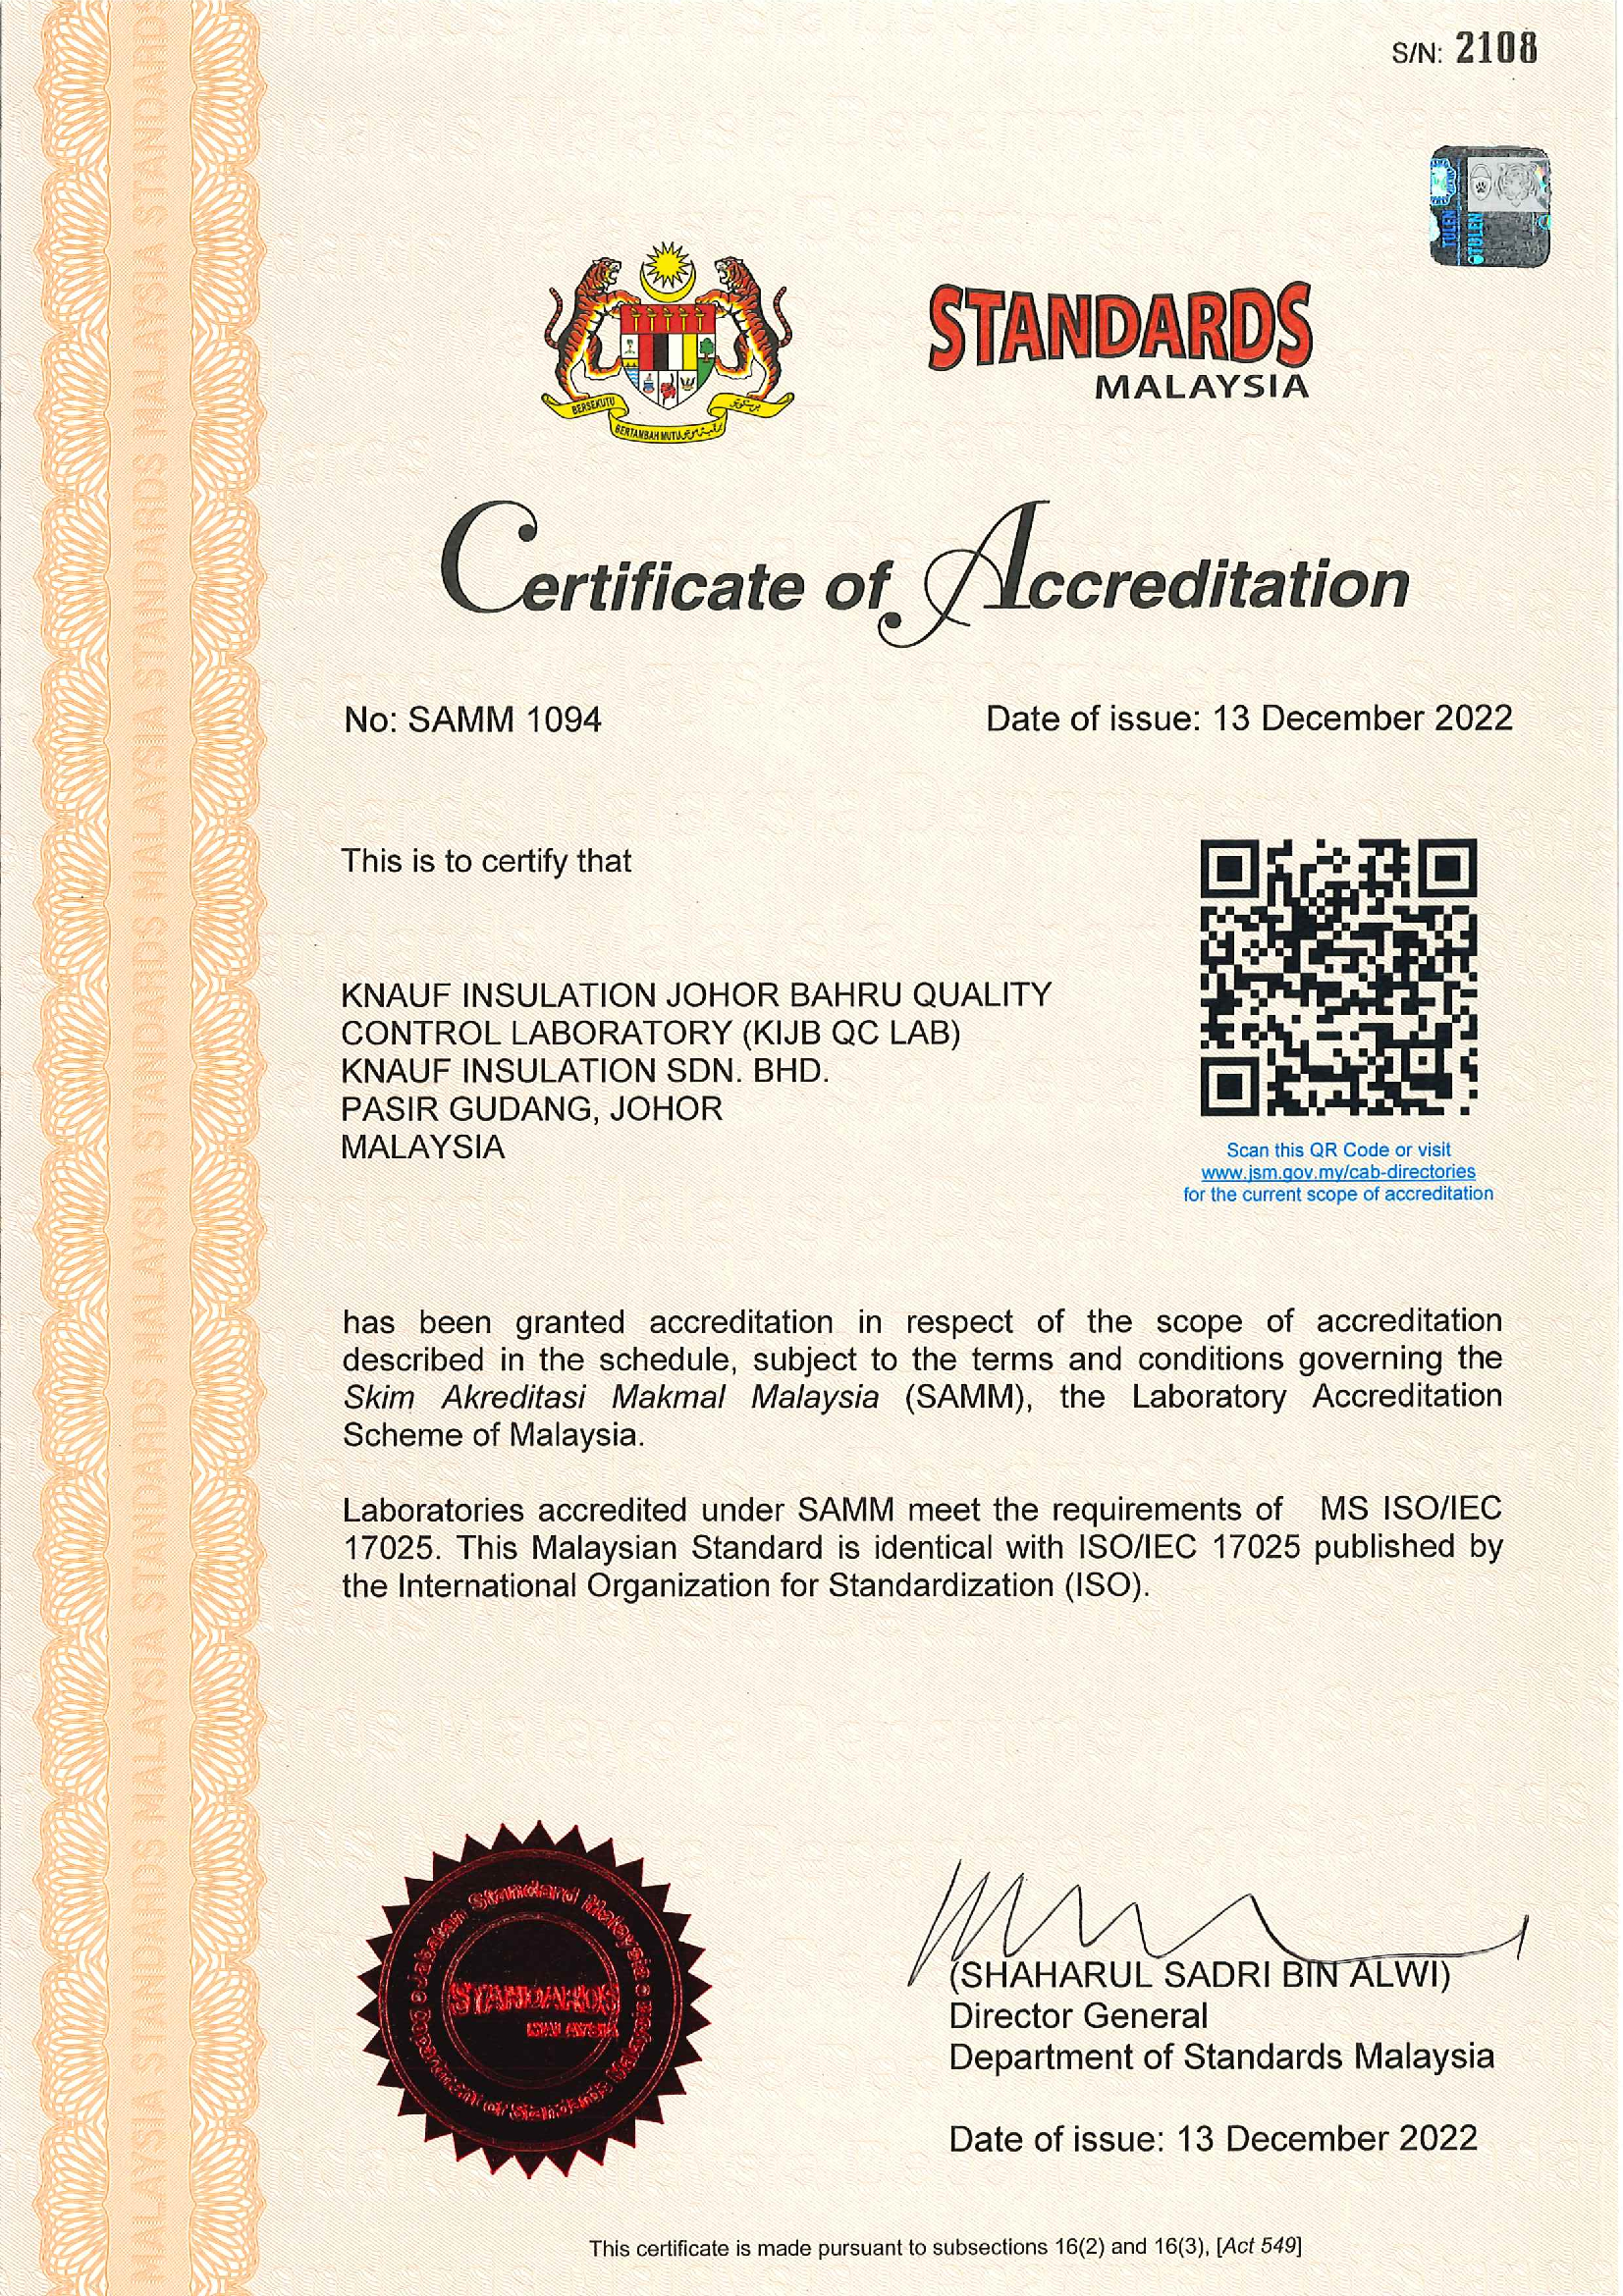 Standards Malaysia Certificate of Accreditation